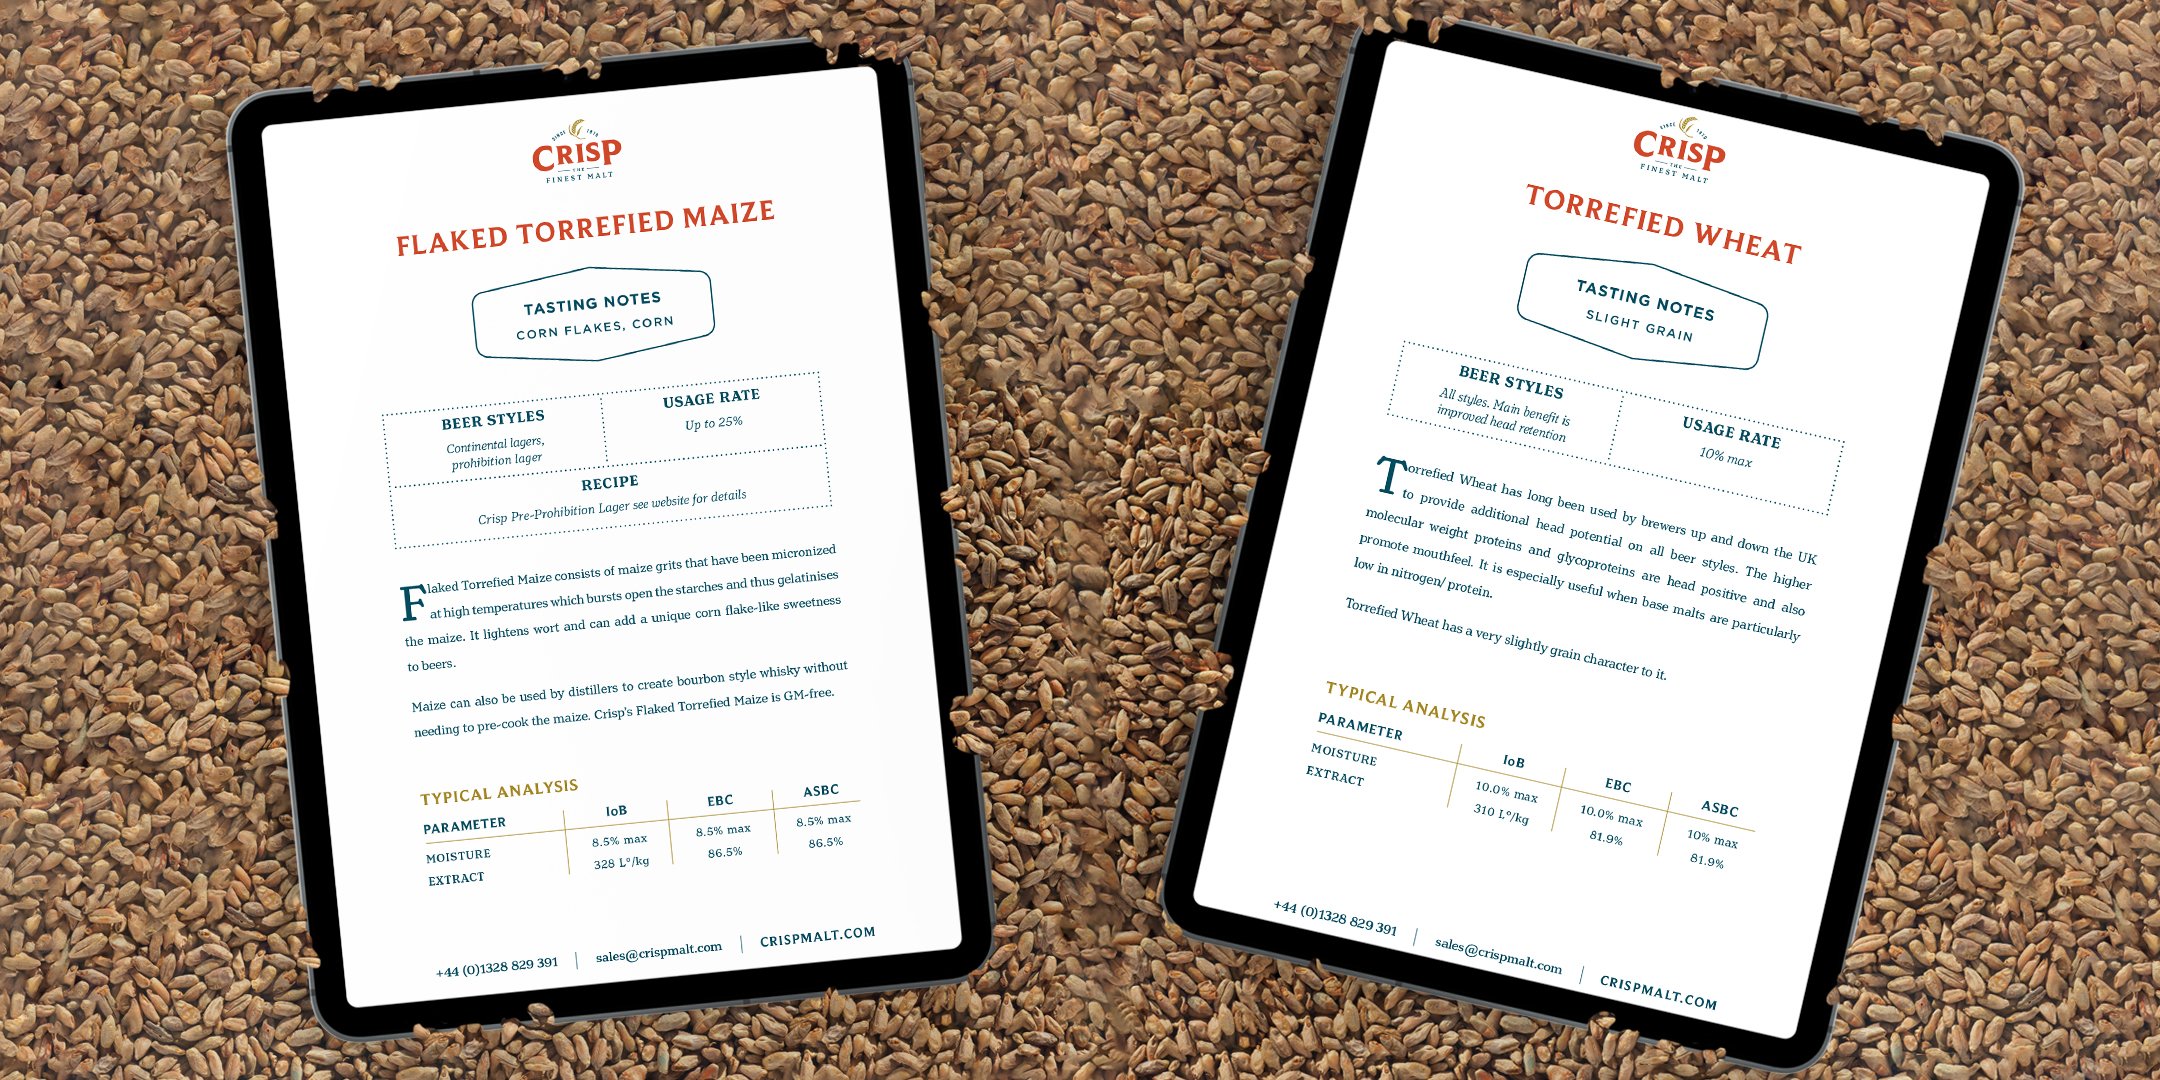 _-A4592_Hubspot-Image_Non-Malted-Cereals_Ipads